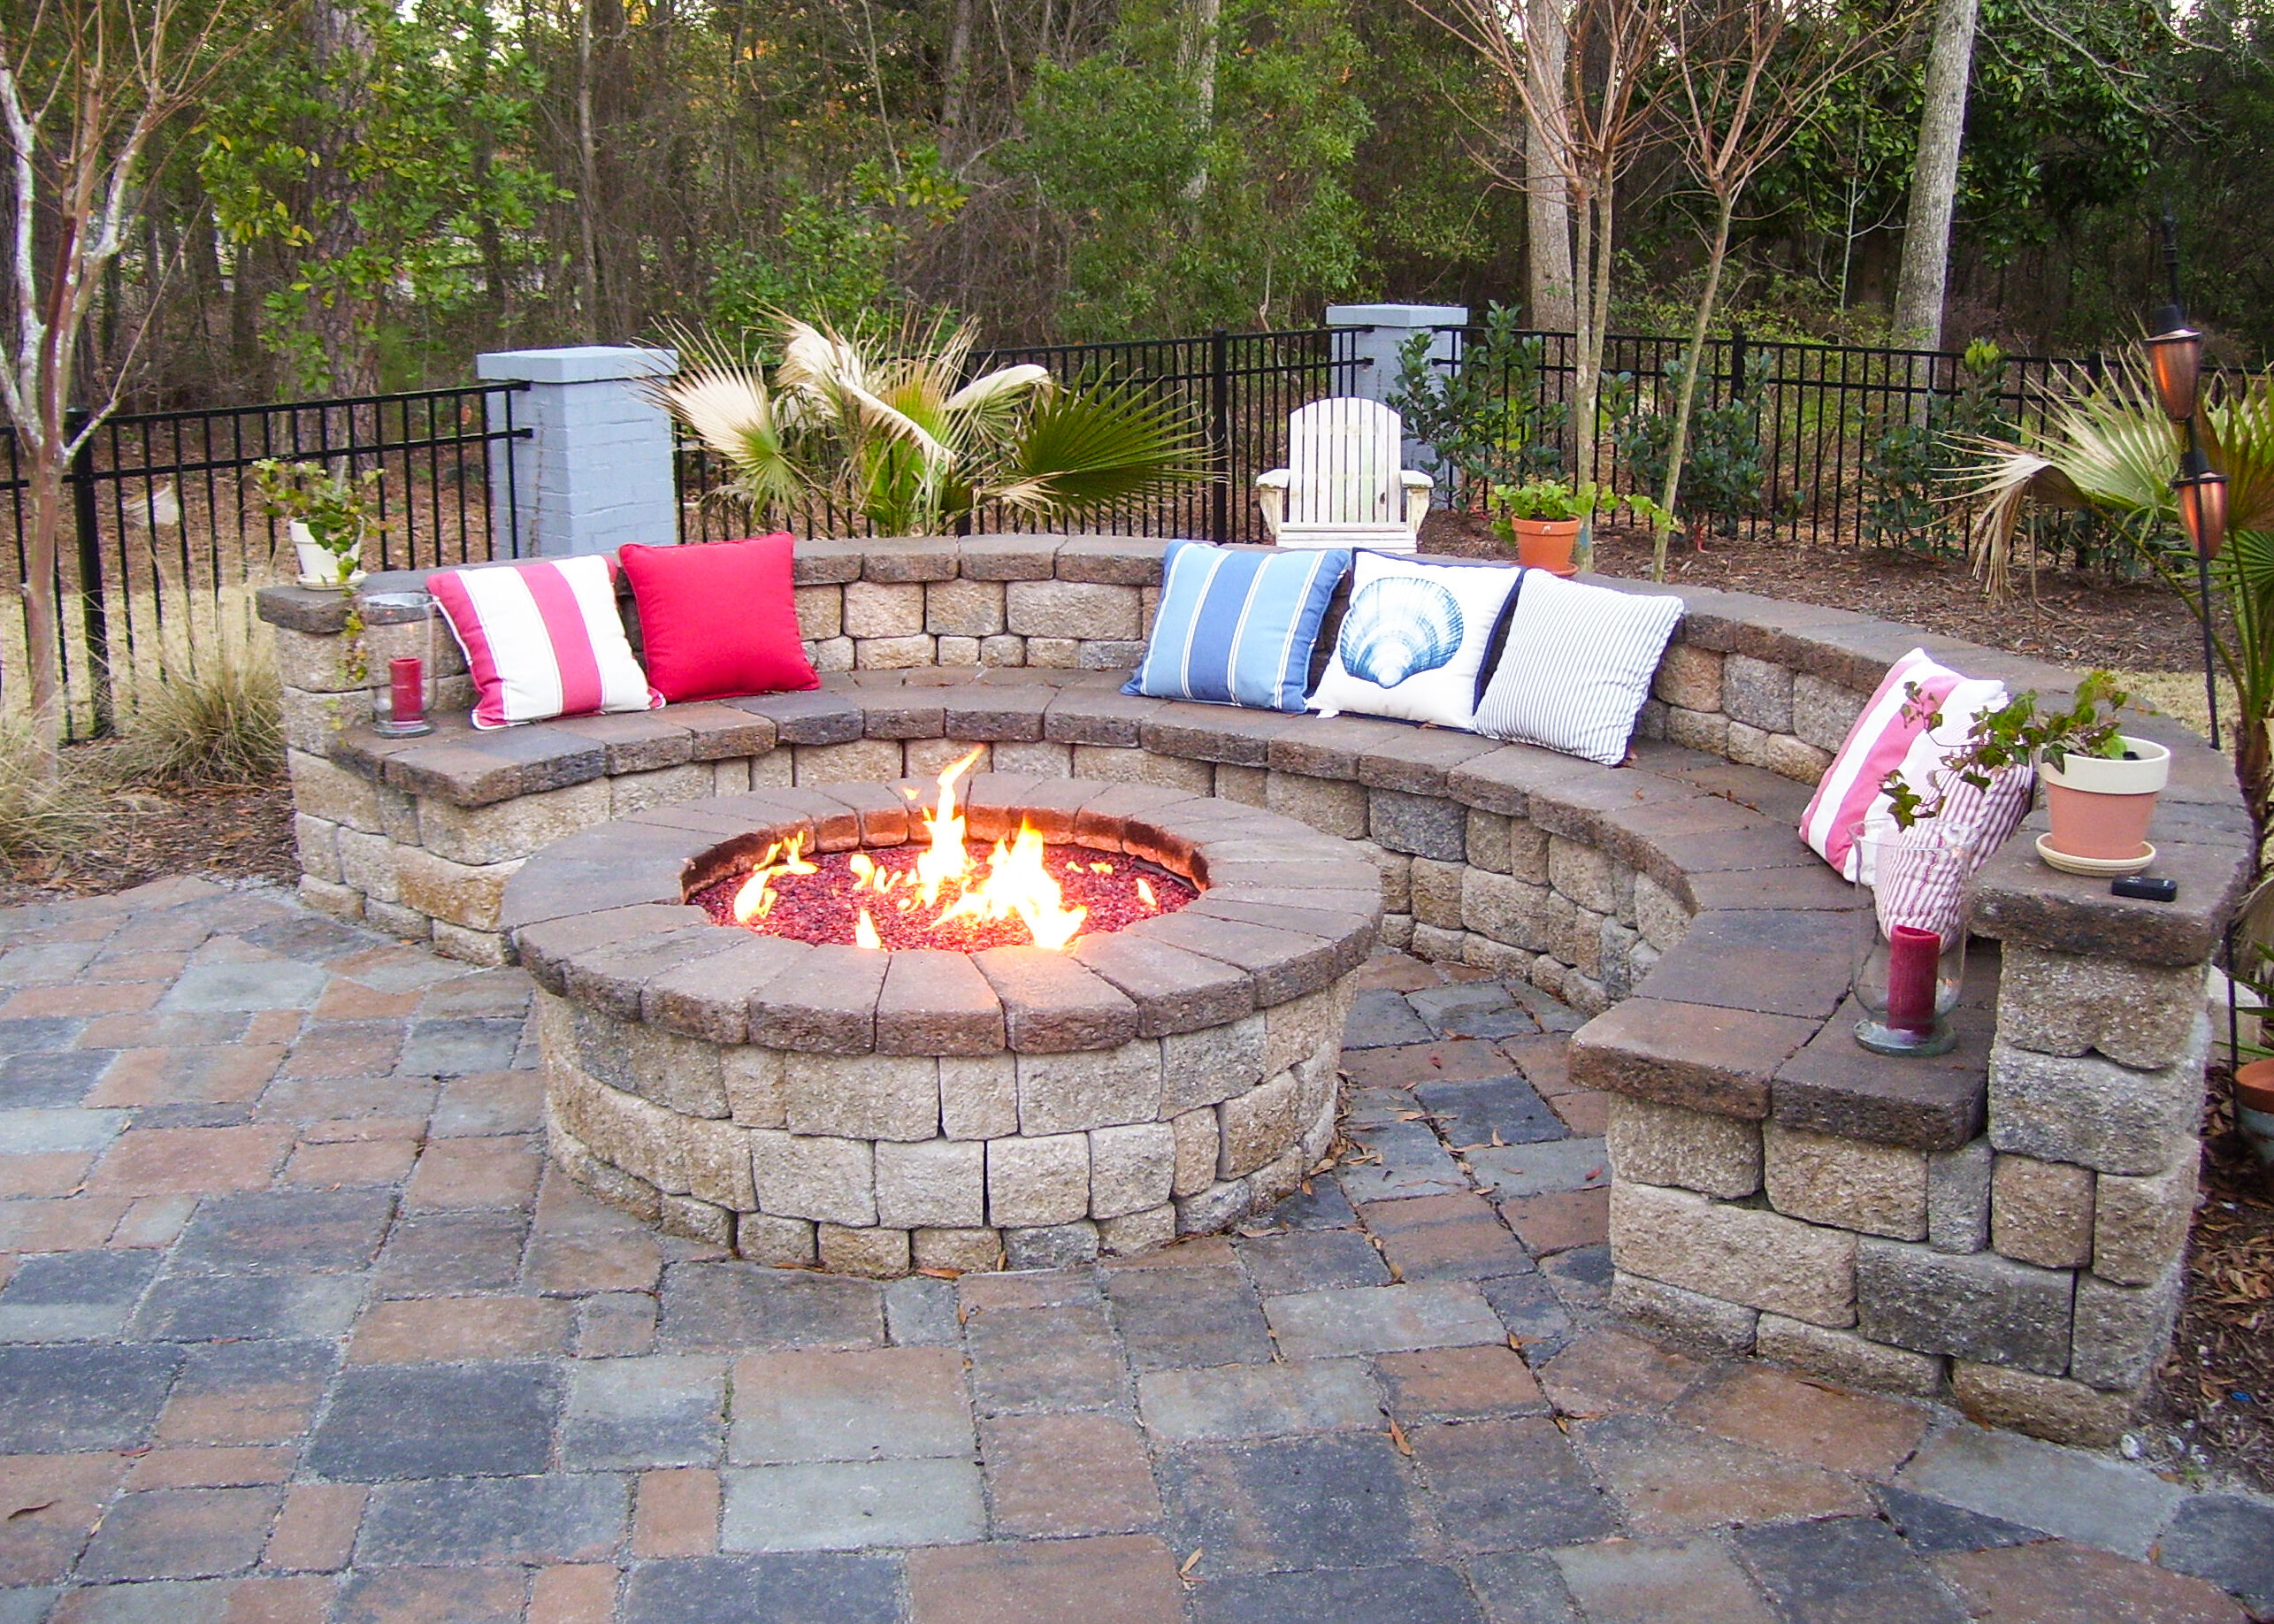 3 Easy Diy Fire Pit Ideas, Build Your Own Backyard Fire Pit